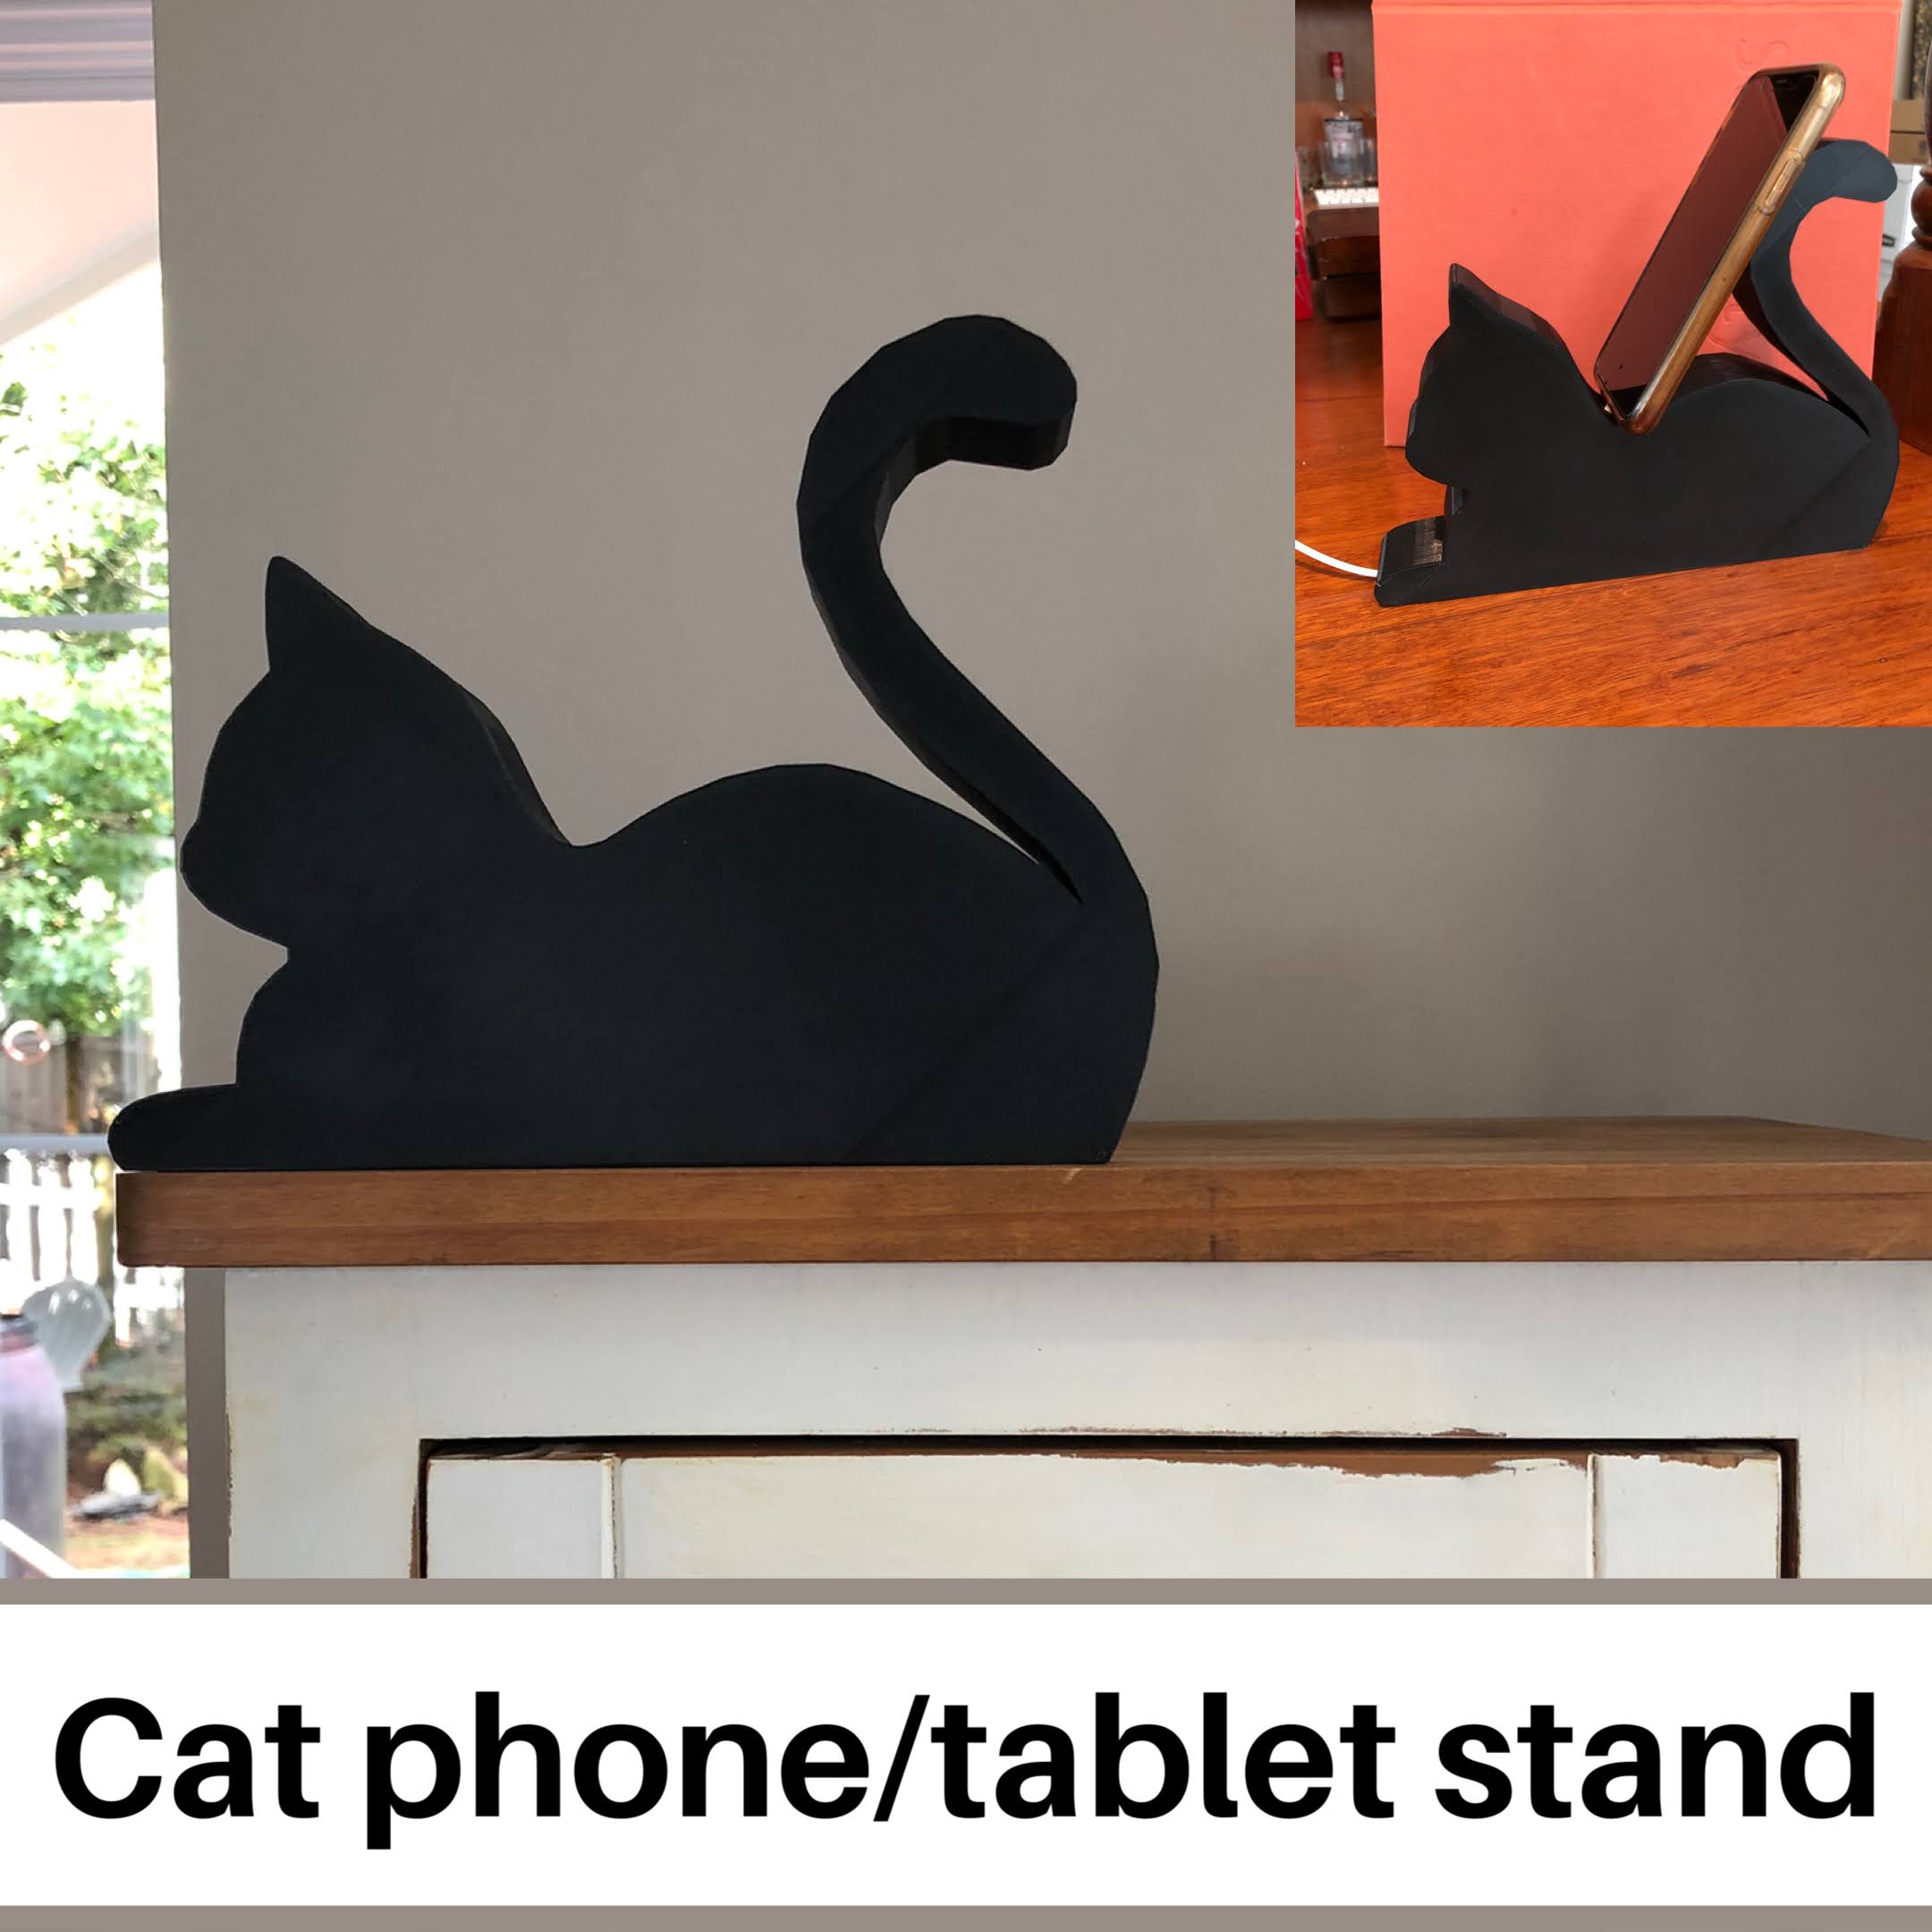 Cat phone or tablet stand by Ericka | Download free STL model ...